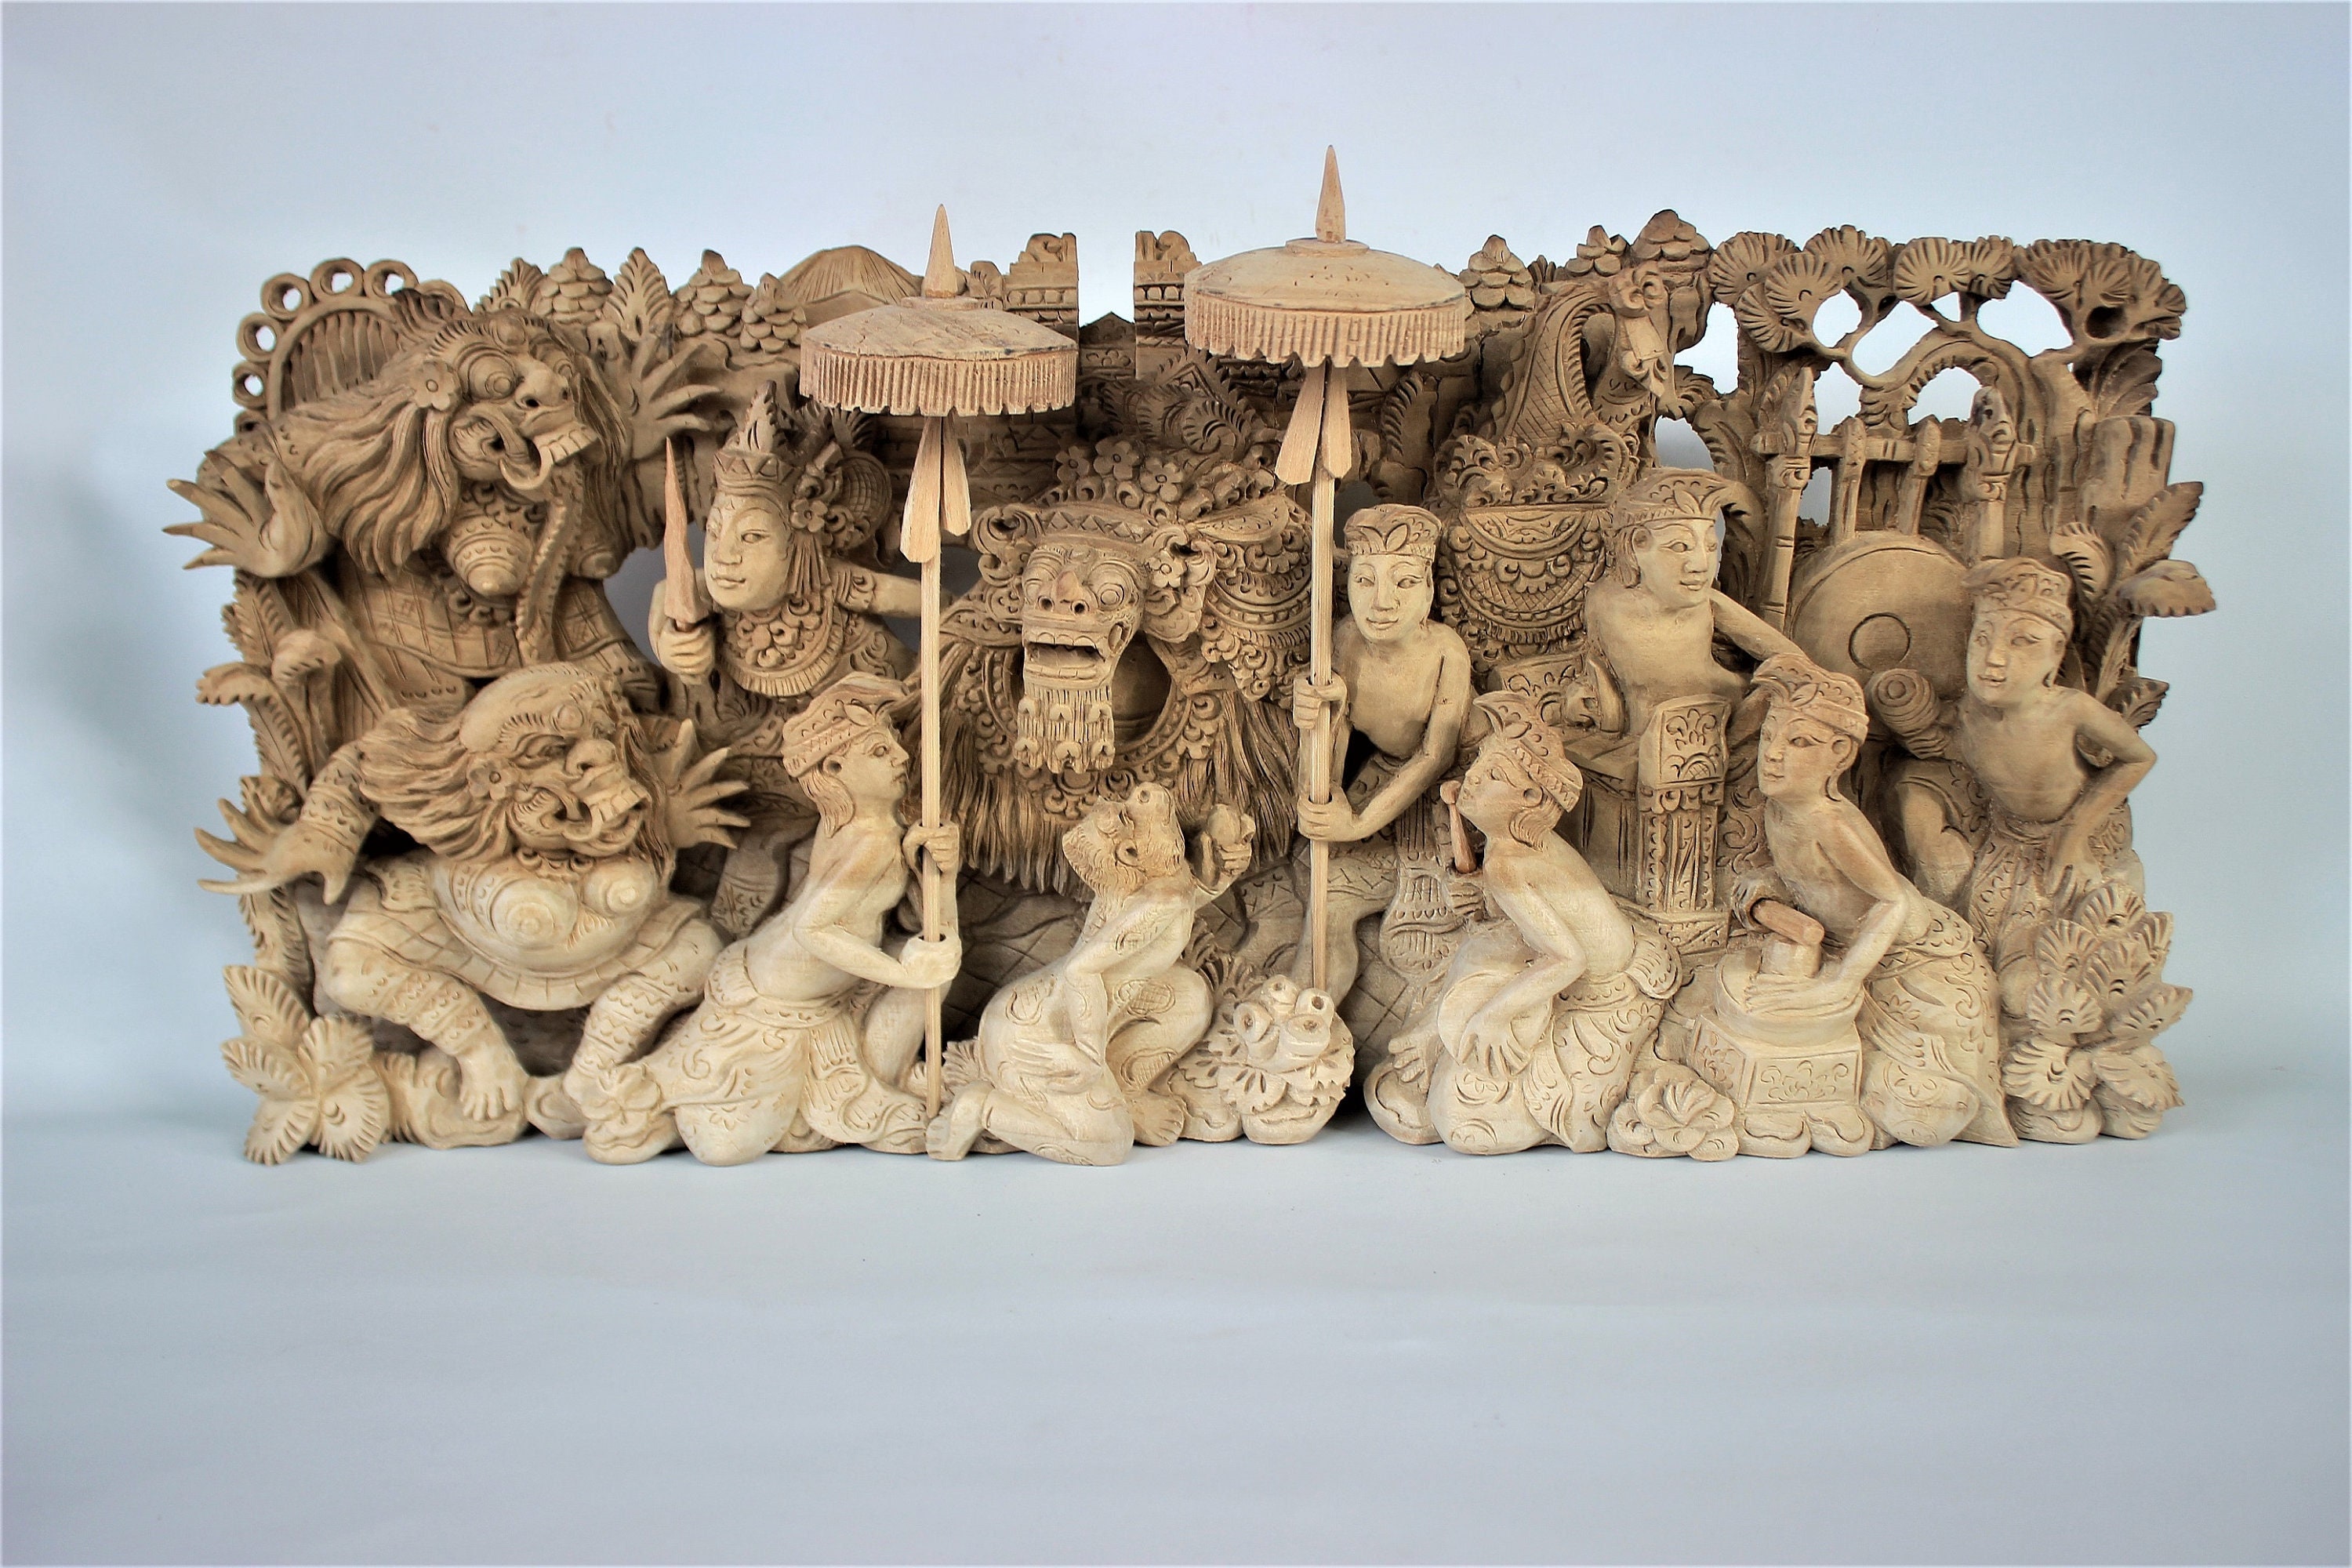 Unique Wood Sculpture from Indonesia - Family Love